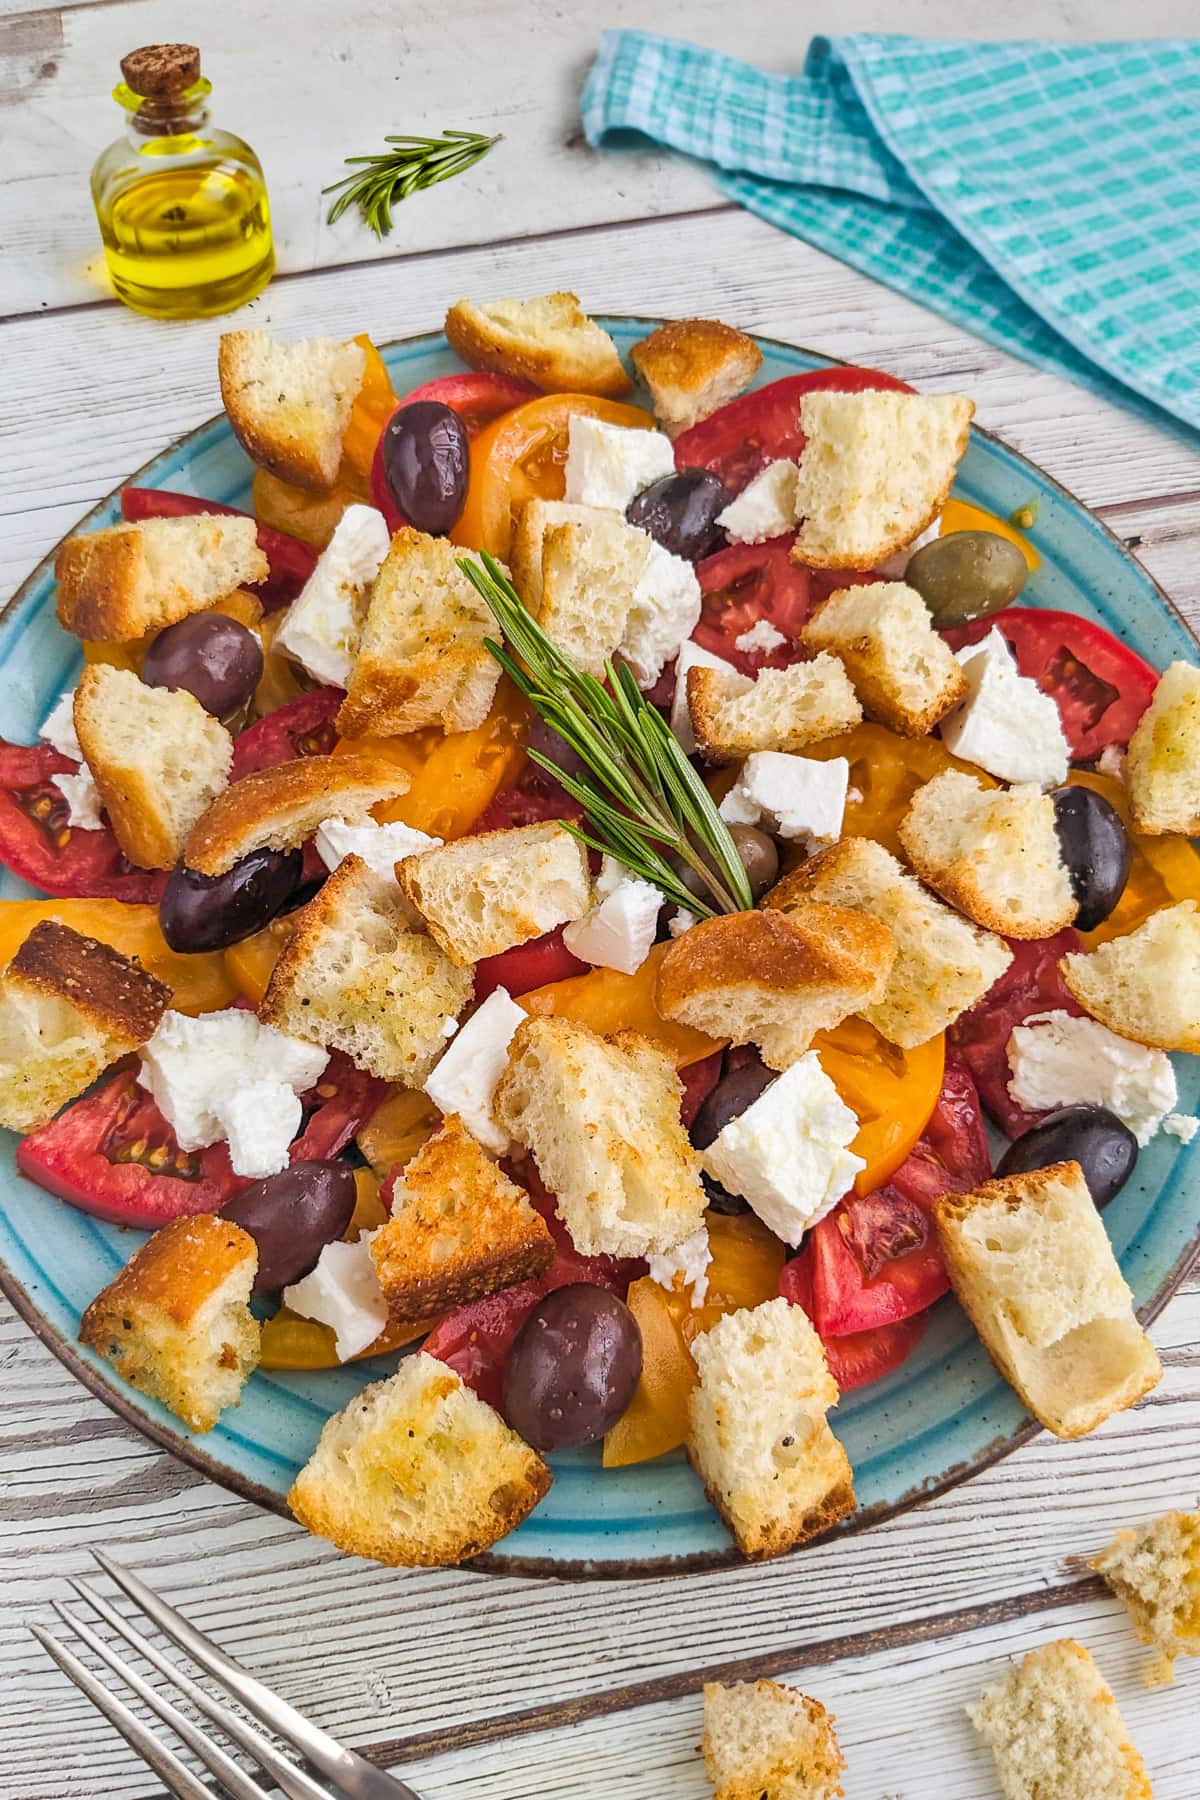 Top view of tomato and feta salad with croutons on a wooden table.